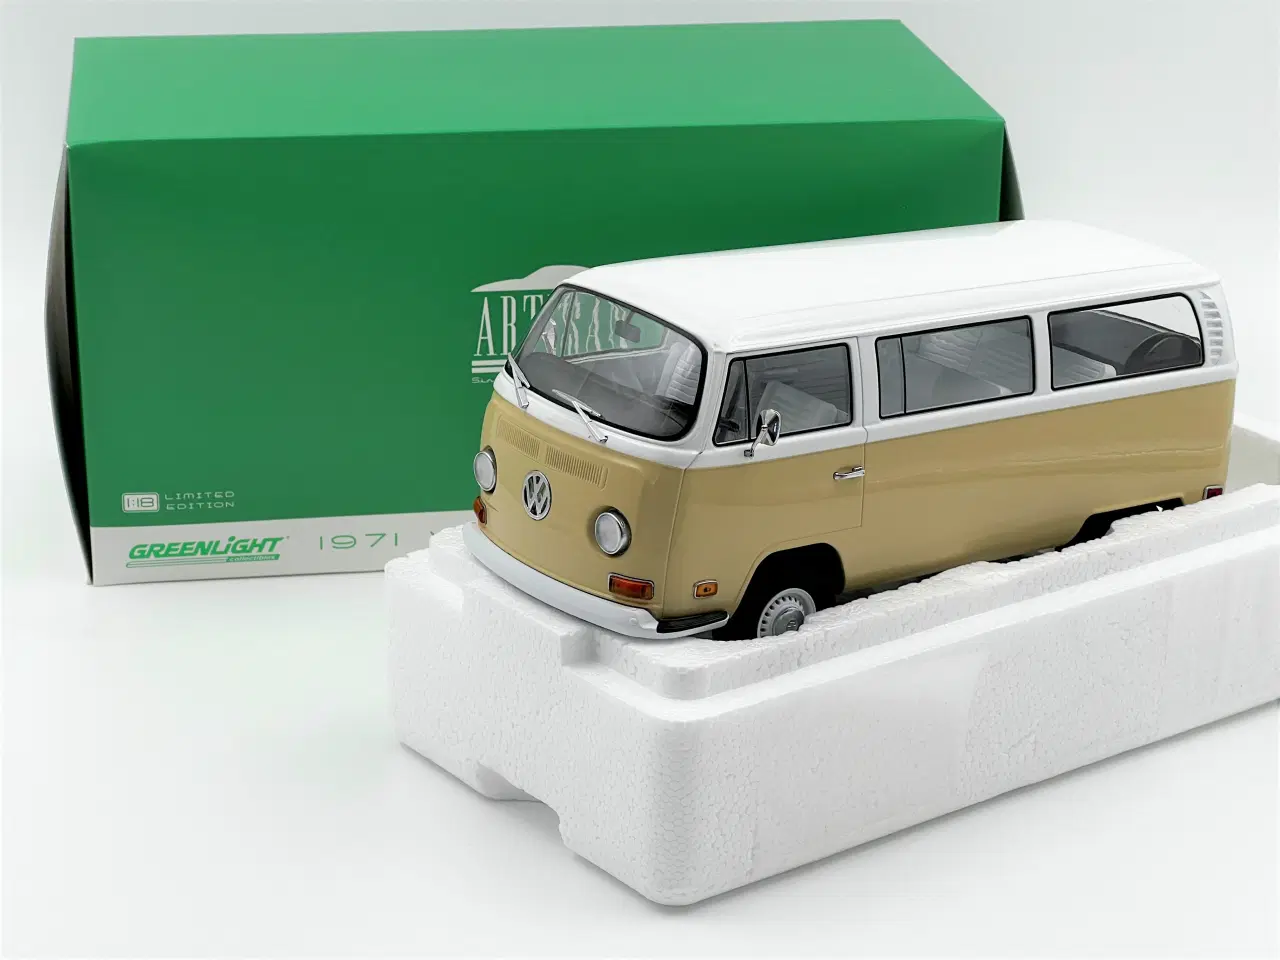 Billede 8 - 1971 VW T2a "Early Bay" Bus Limited Edition 1:18